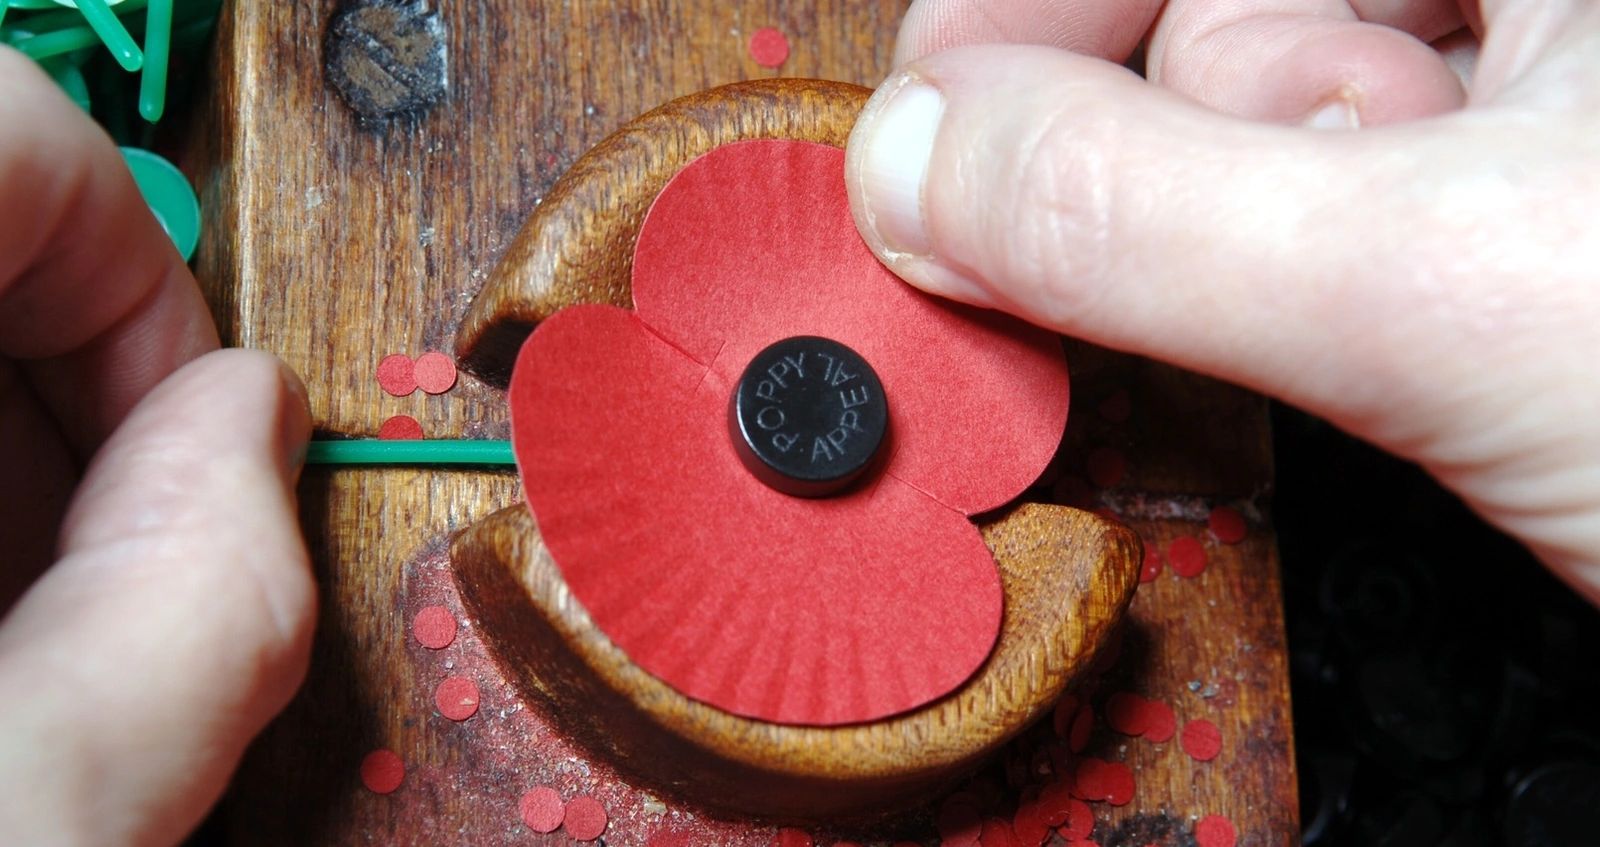 https://functions.rblcdn.co.uk/sitefinity/images/default-source/stories/11-things-you-might-not-know-about-the-poppy/stories_11_things_poppy_recycle.jpg?sfvrsn=9a22b32c_4&method=CropCropArguments&width=1600&height=847